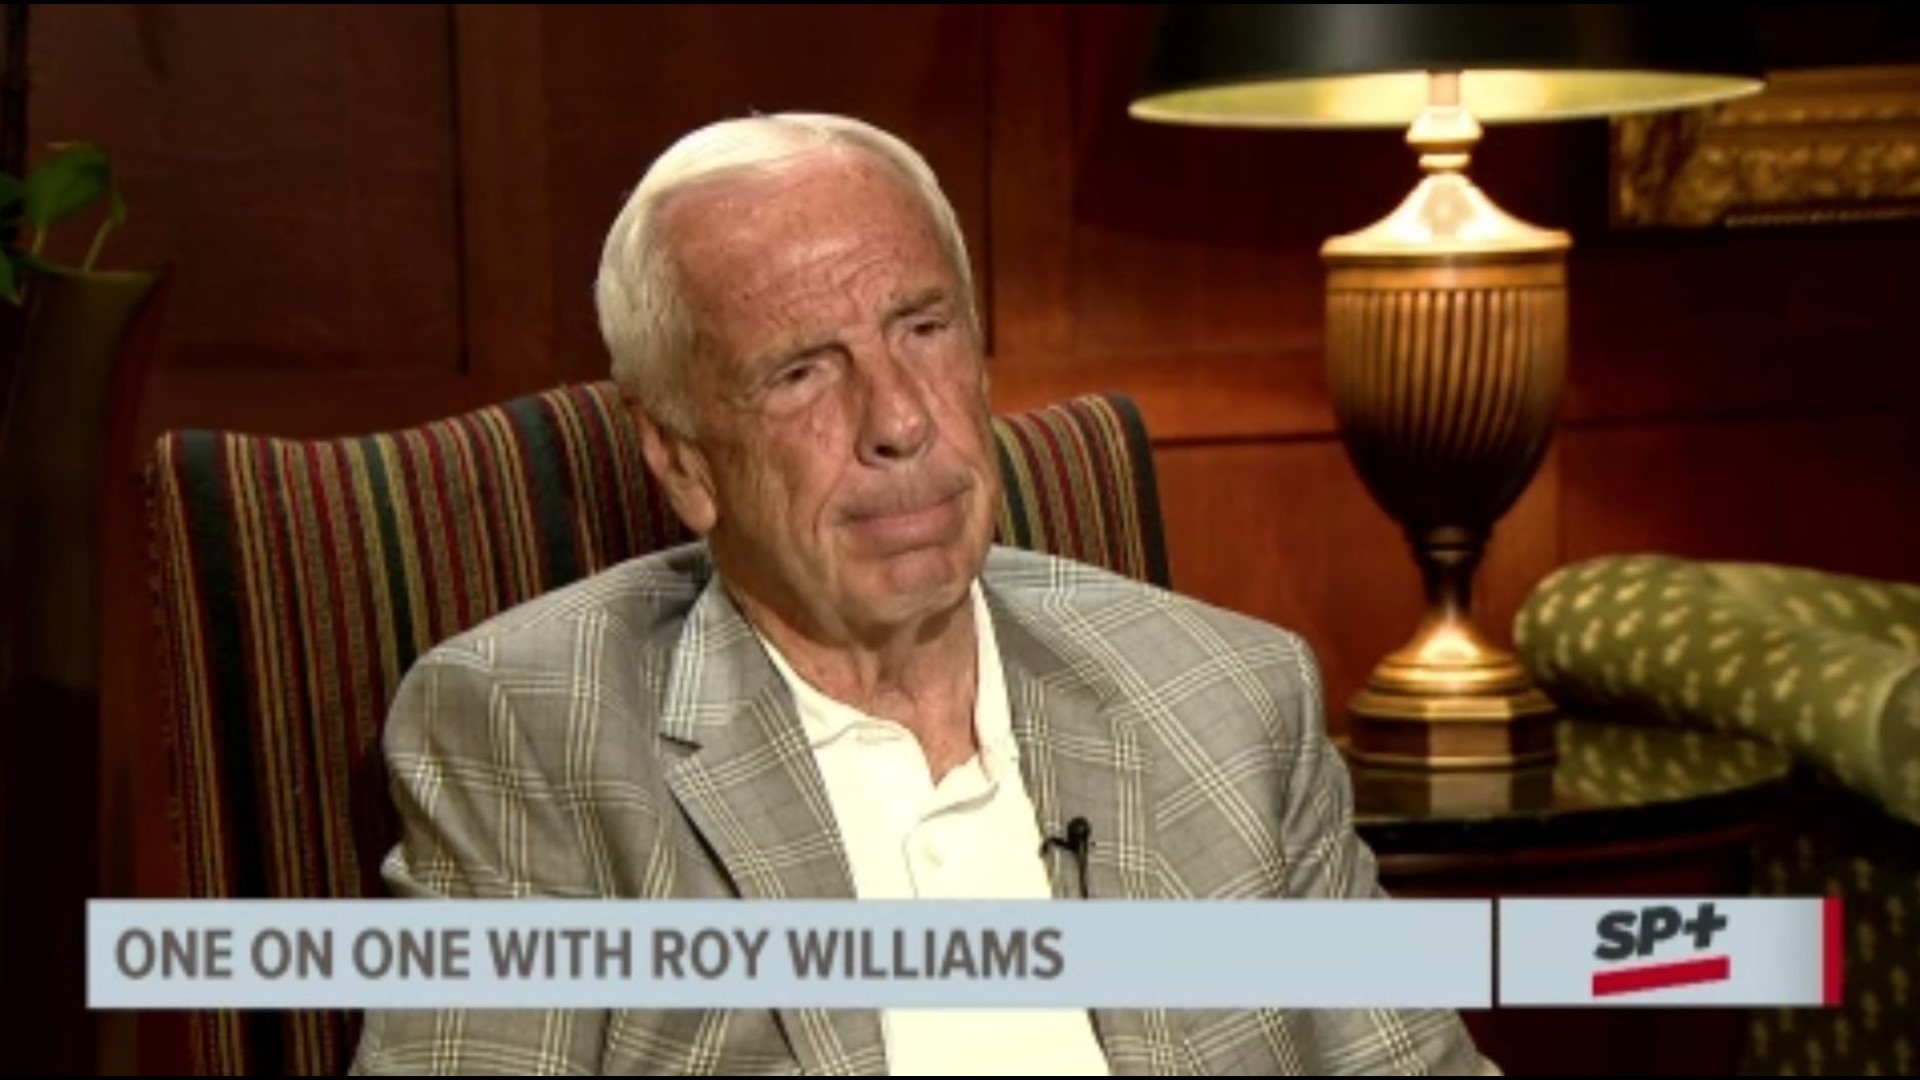 Roy Williams was the featured speaker at the United States Basketball Writers banquet in St. Louis. He got to 900 wins faster than any college coach in history.